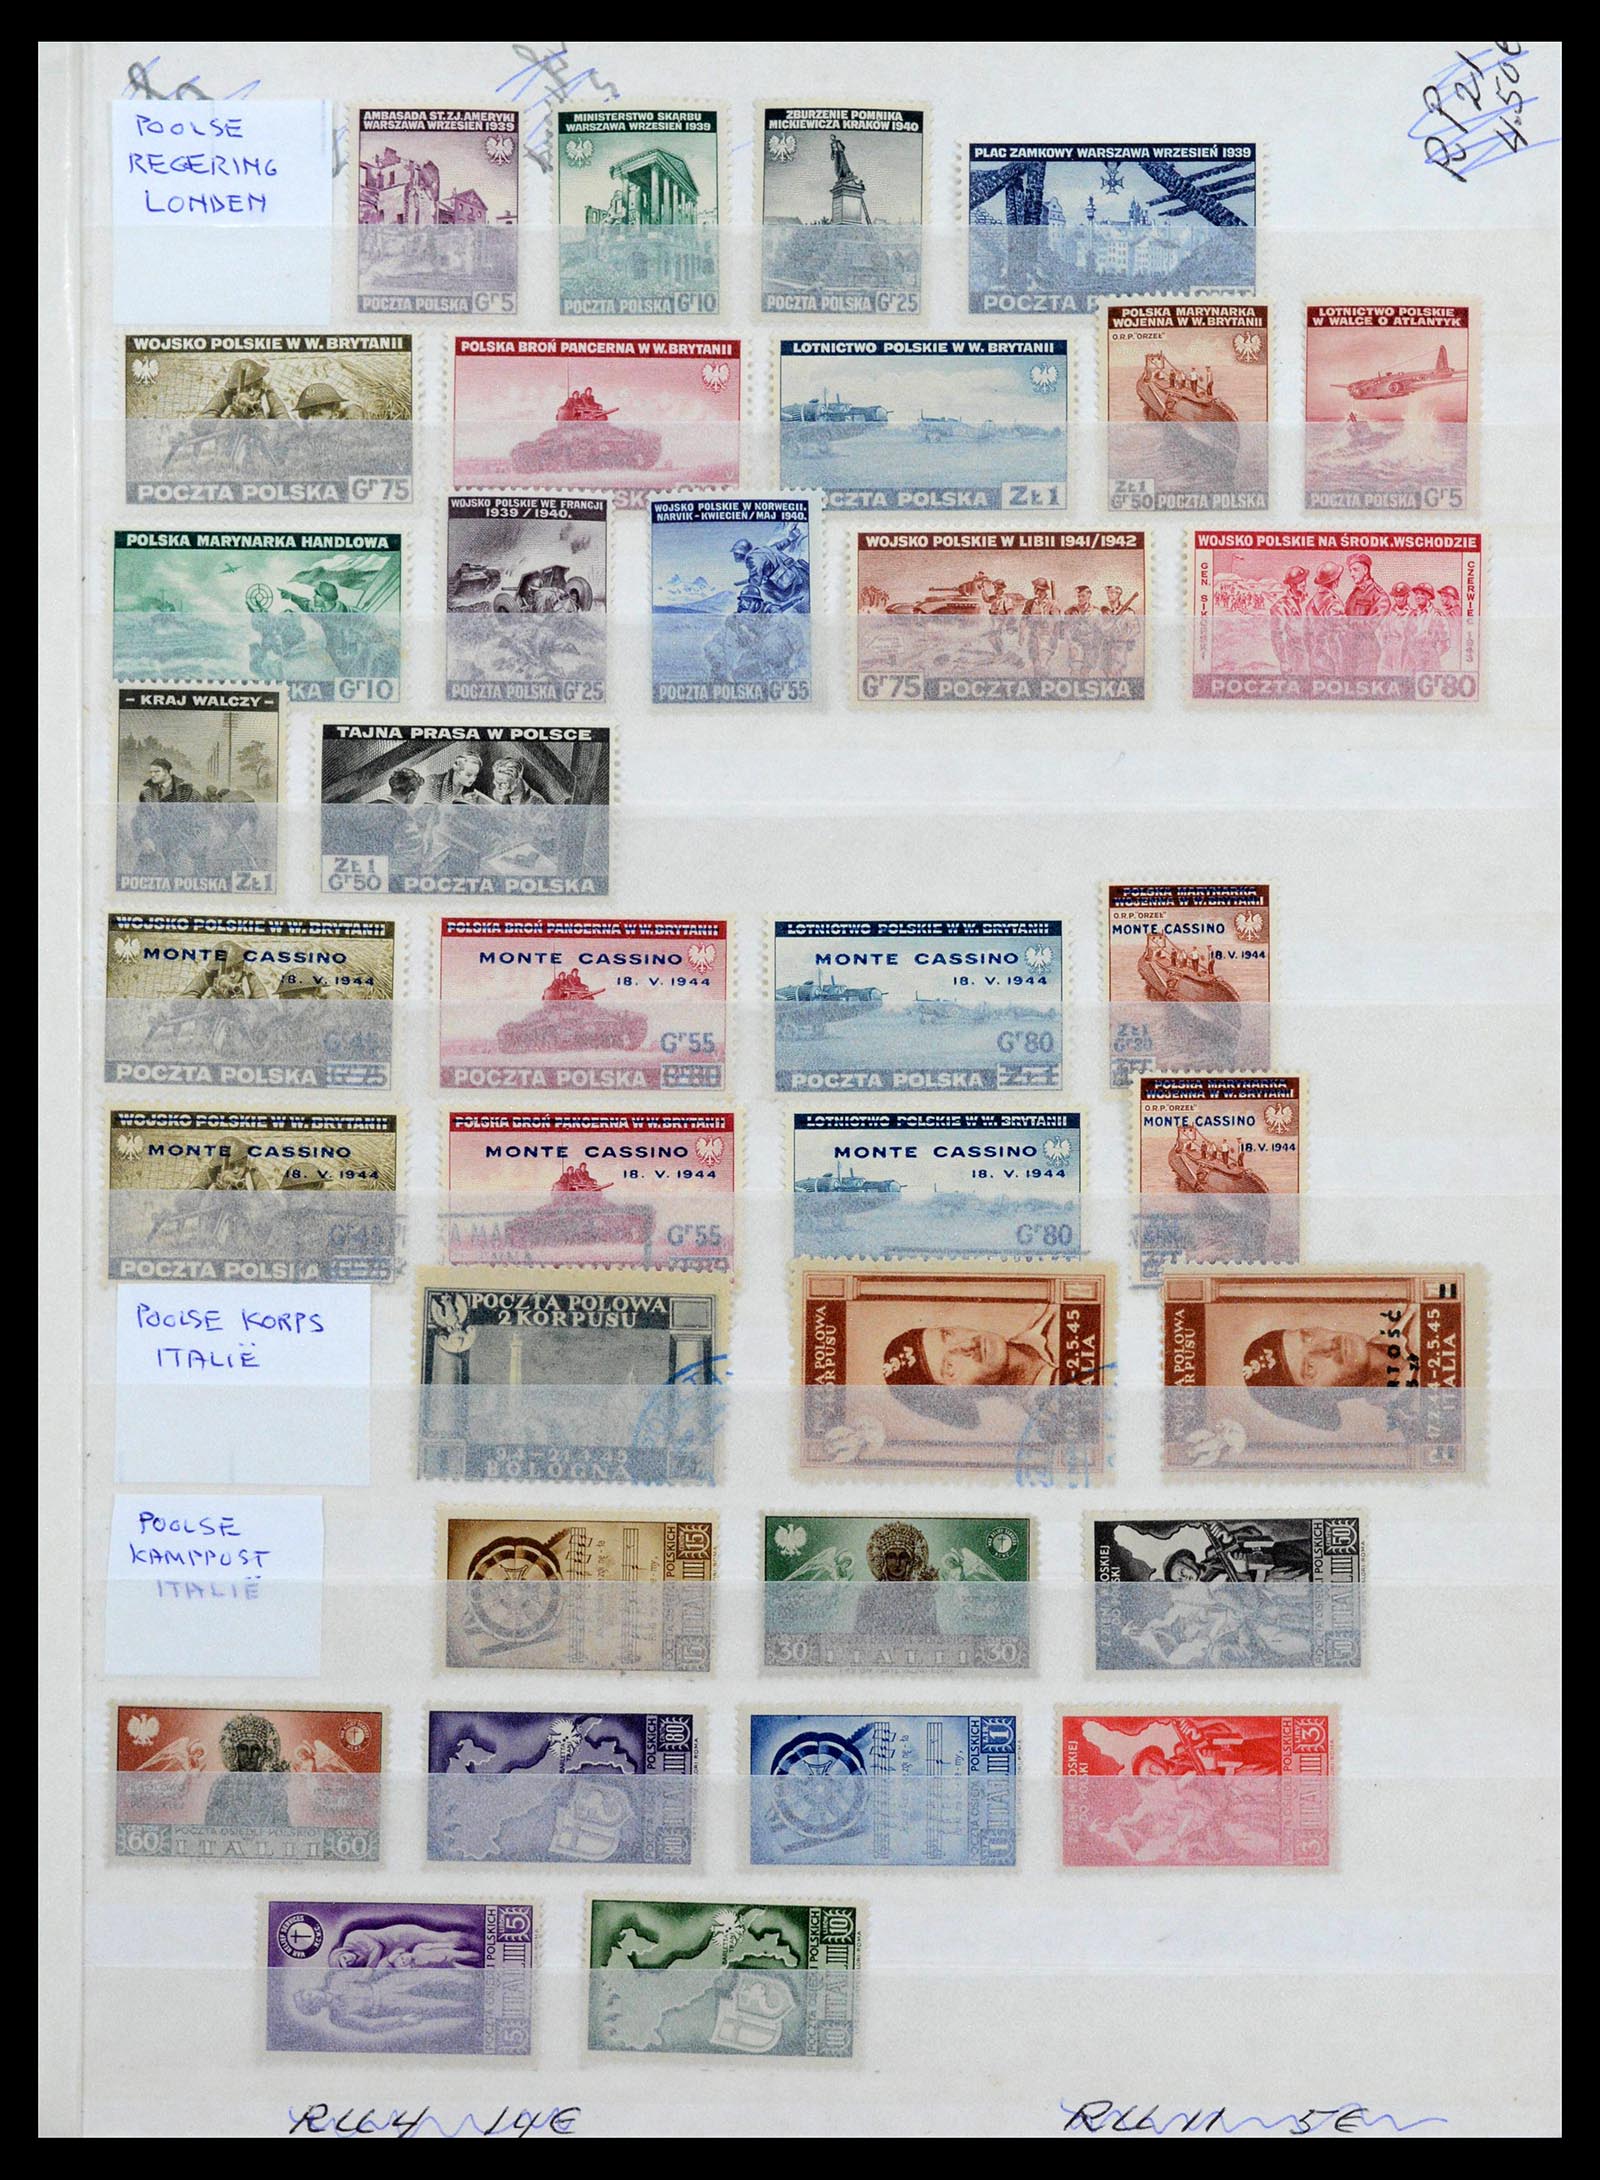 39044 0027 - Stamp collection 39044 European countries 1900-1945.